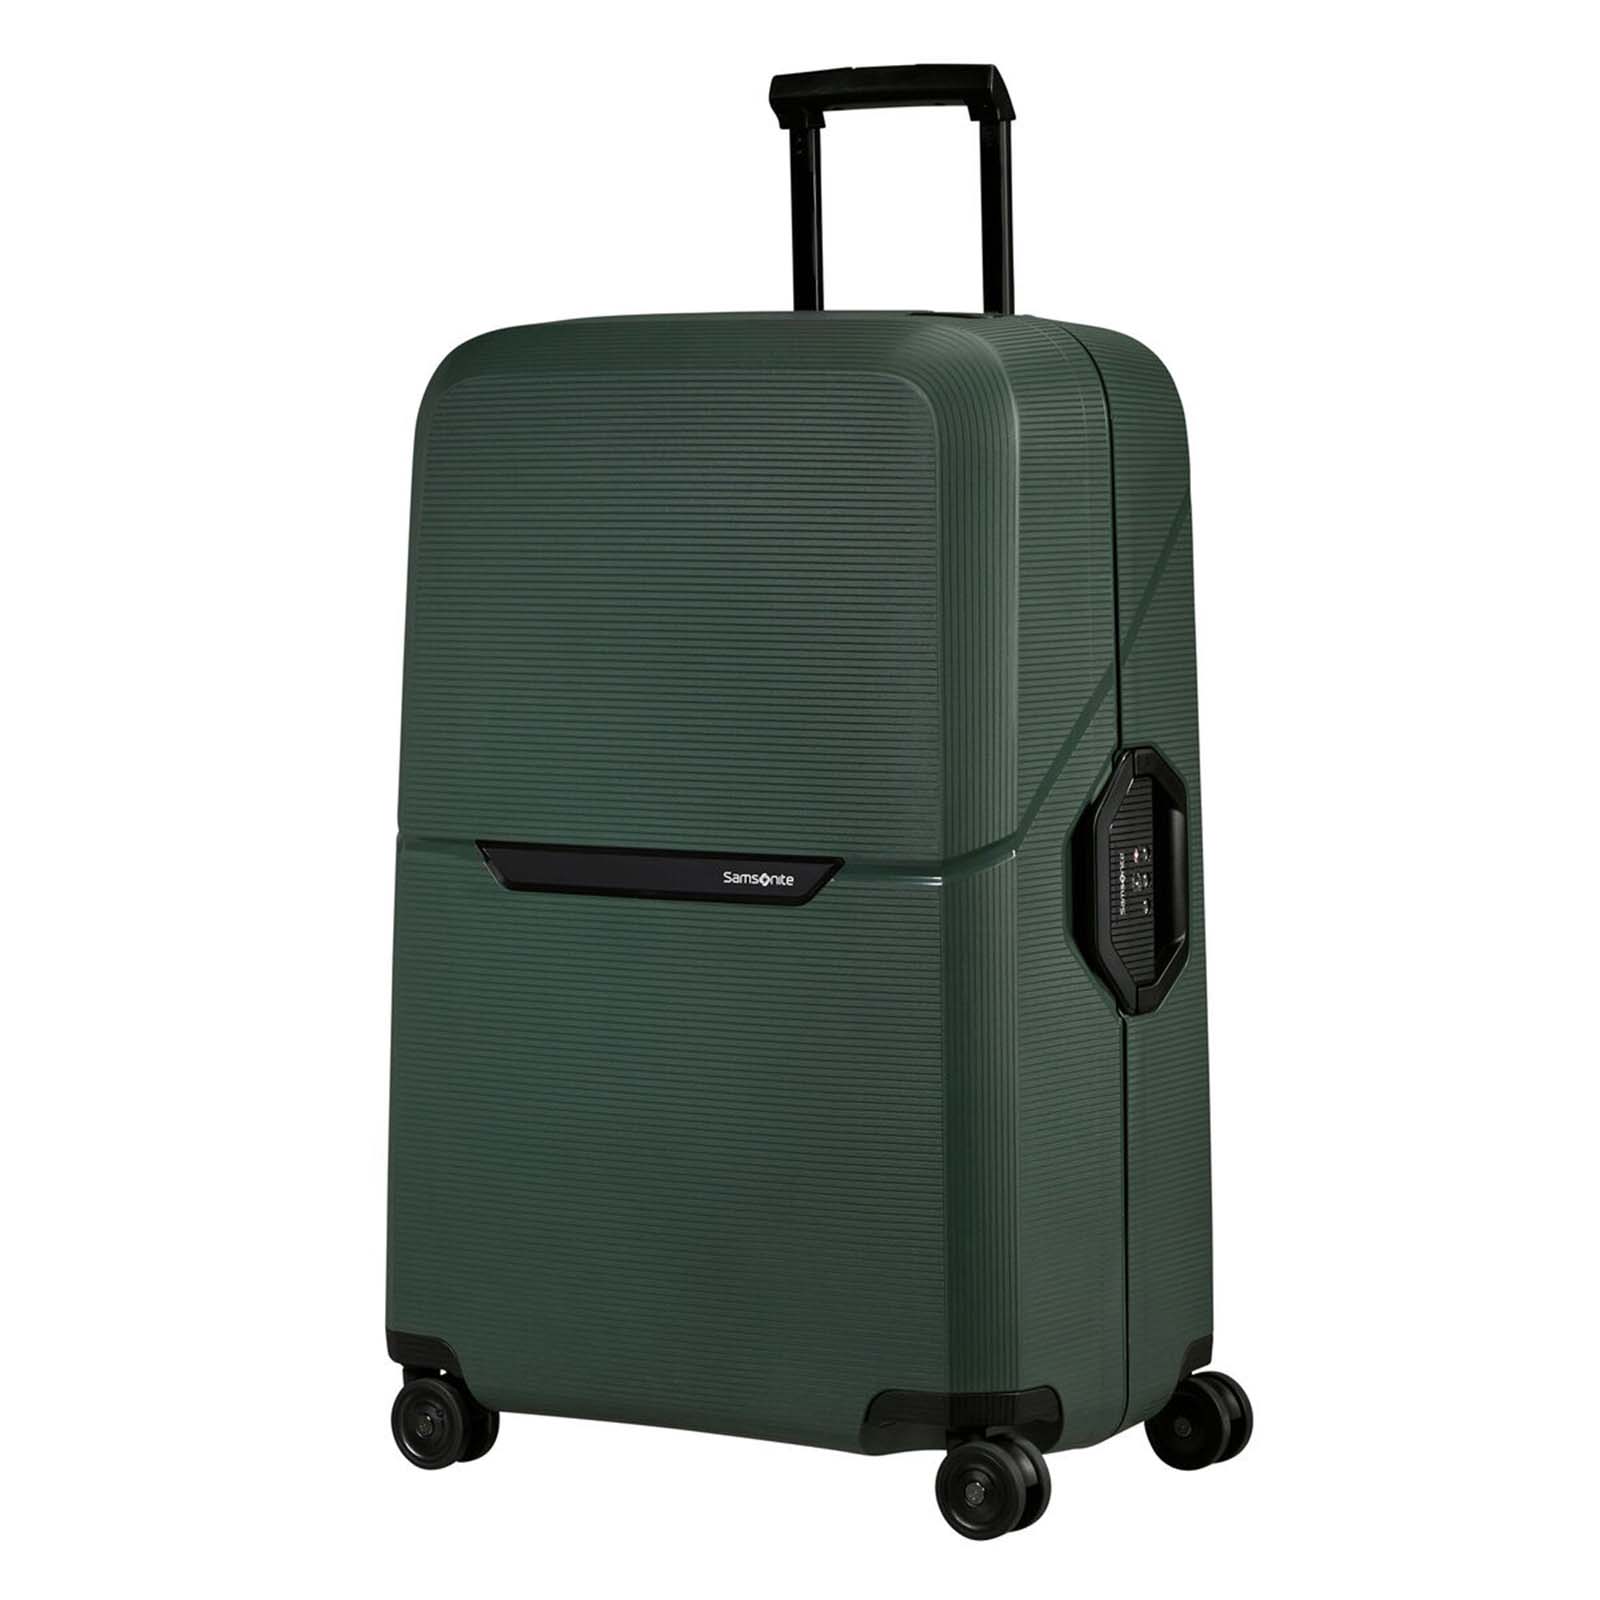 Samsonite-Magnum-Eco-75cm-Suitcase-Forest-Green-Front-Angle